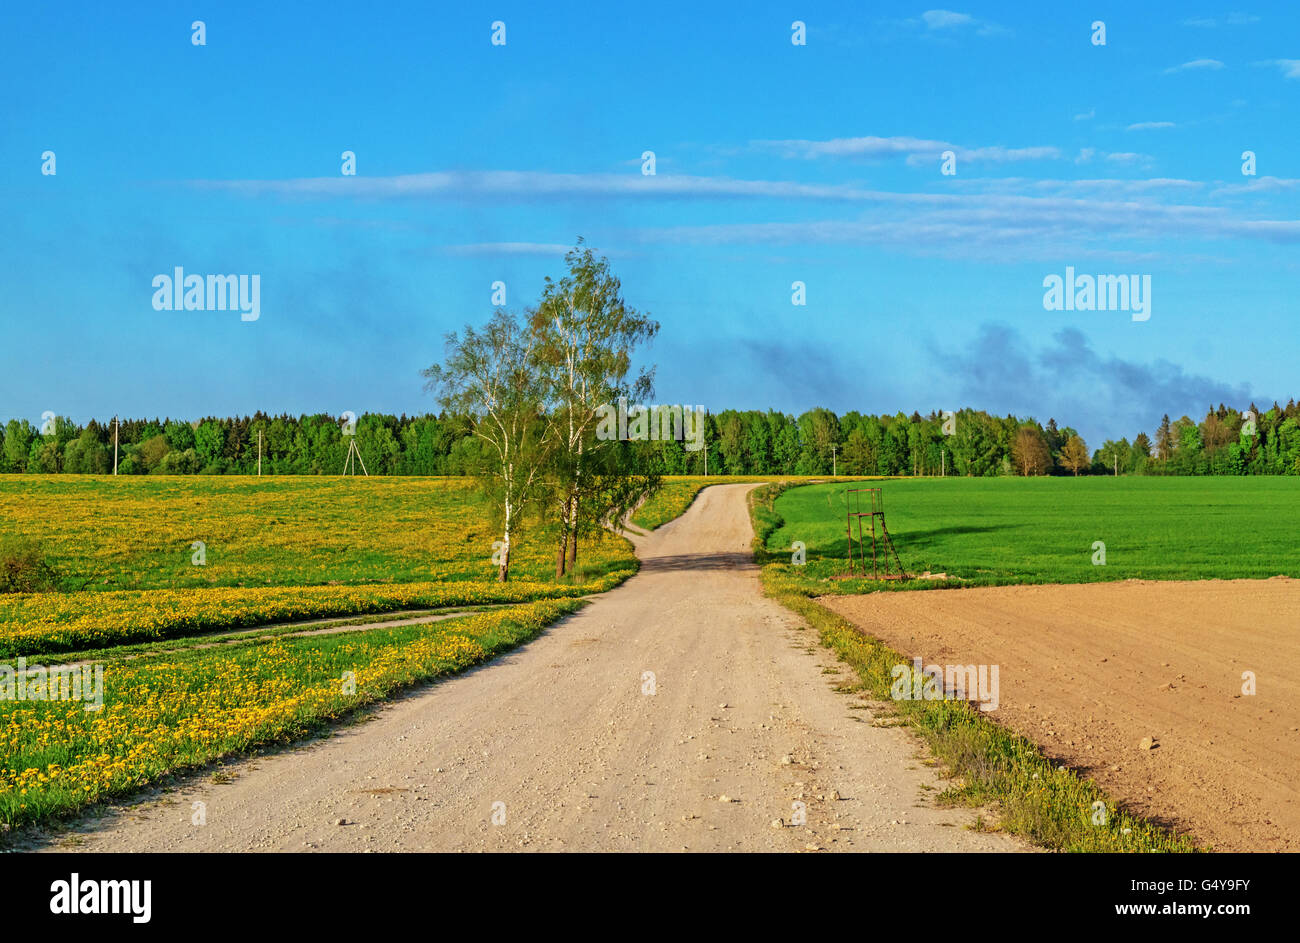 Ground road through agricultural fields.Along the road plowed brown field and green grass fields. Stock Photo